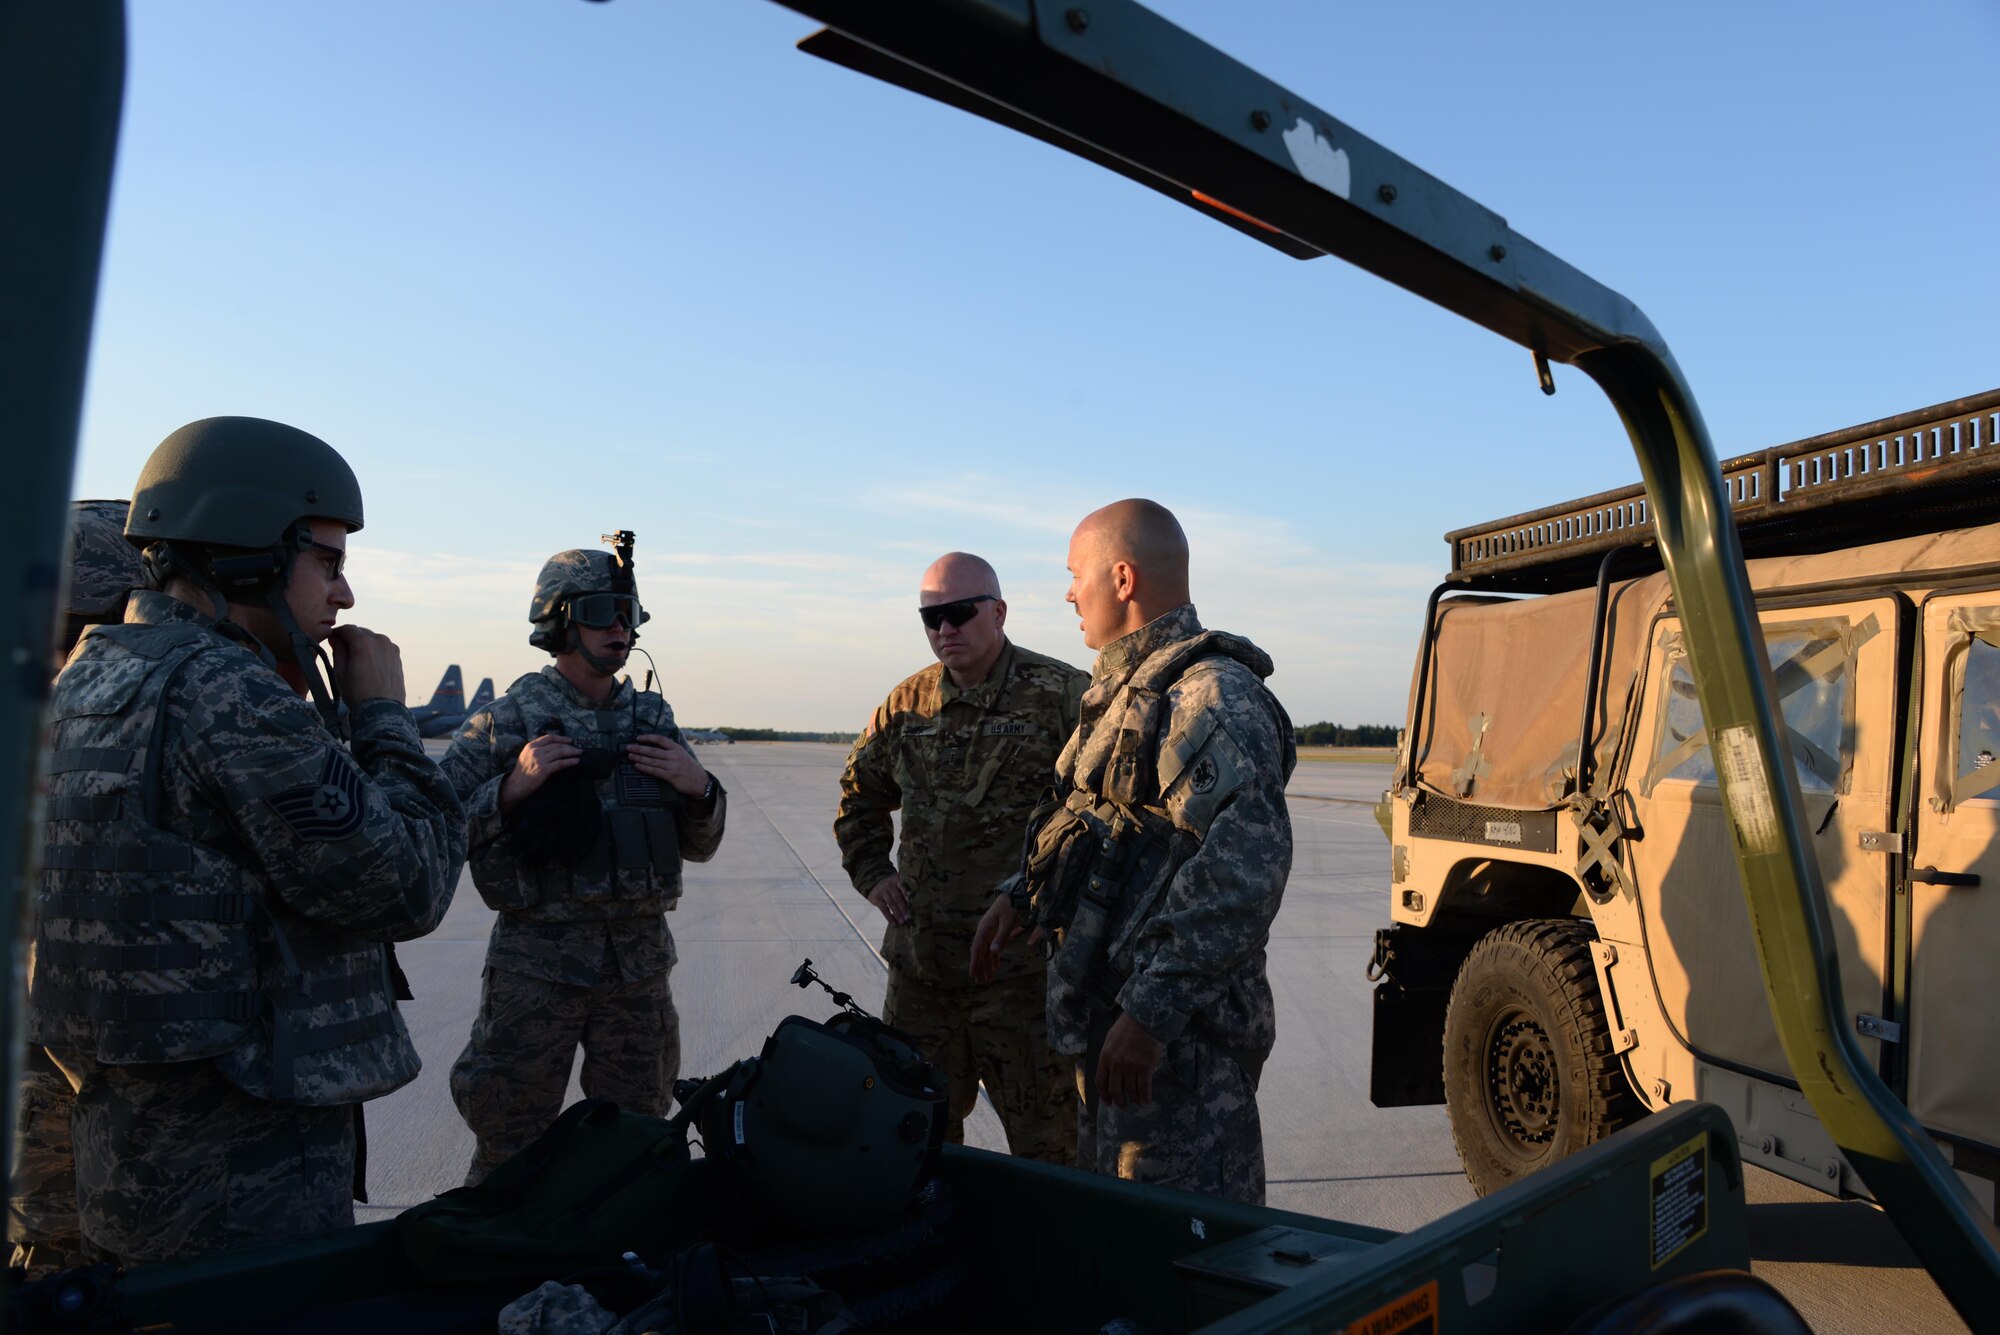 U.S. Army Chief Warrant Officer 3 Eric Tupa, Company B 3-238 General Support Aviation Battalion CH-47 Chinook pilot, right, briefs Airmen from the 821st Contingency Response Group at Alpena Combat Readiness Training Center, Michigan, during Exercise Northern Strike, Aug. 9, 2016. The 821st CRG Airmen were told how to properly attach a HUMVEE to the underside of a Chinook. (U.S. Air Force photo by Senior Airman Amber Carter) 